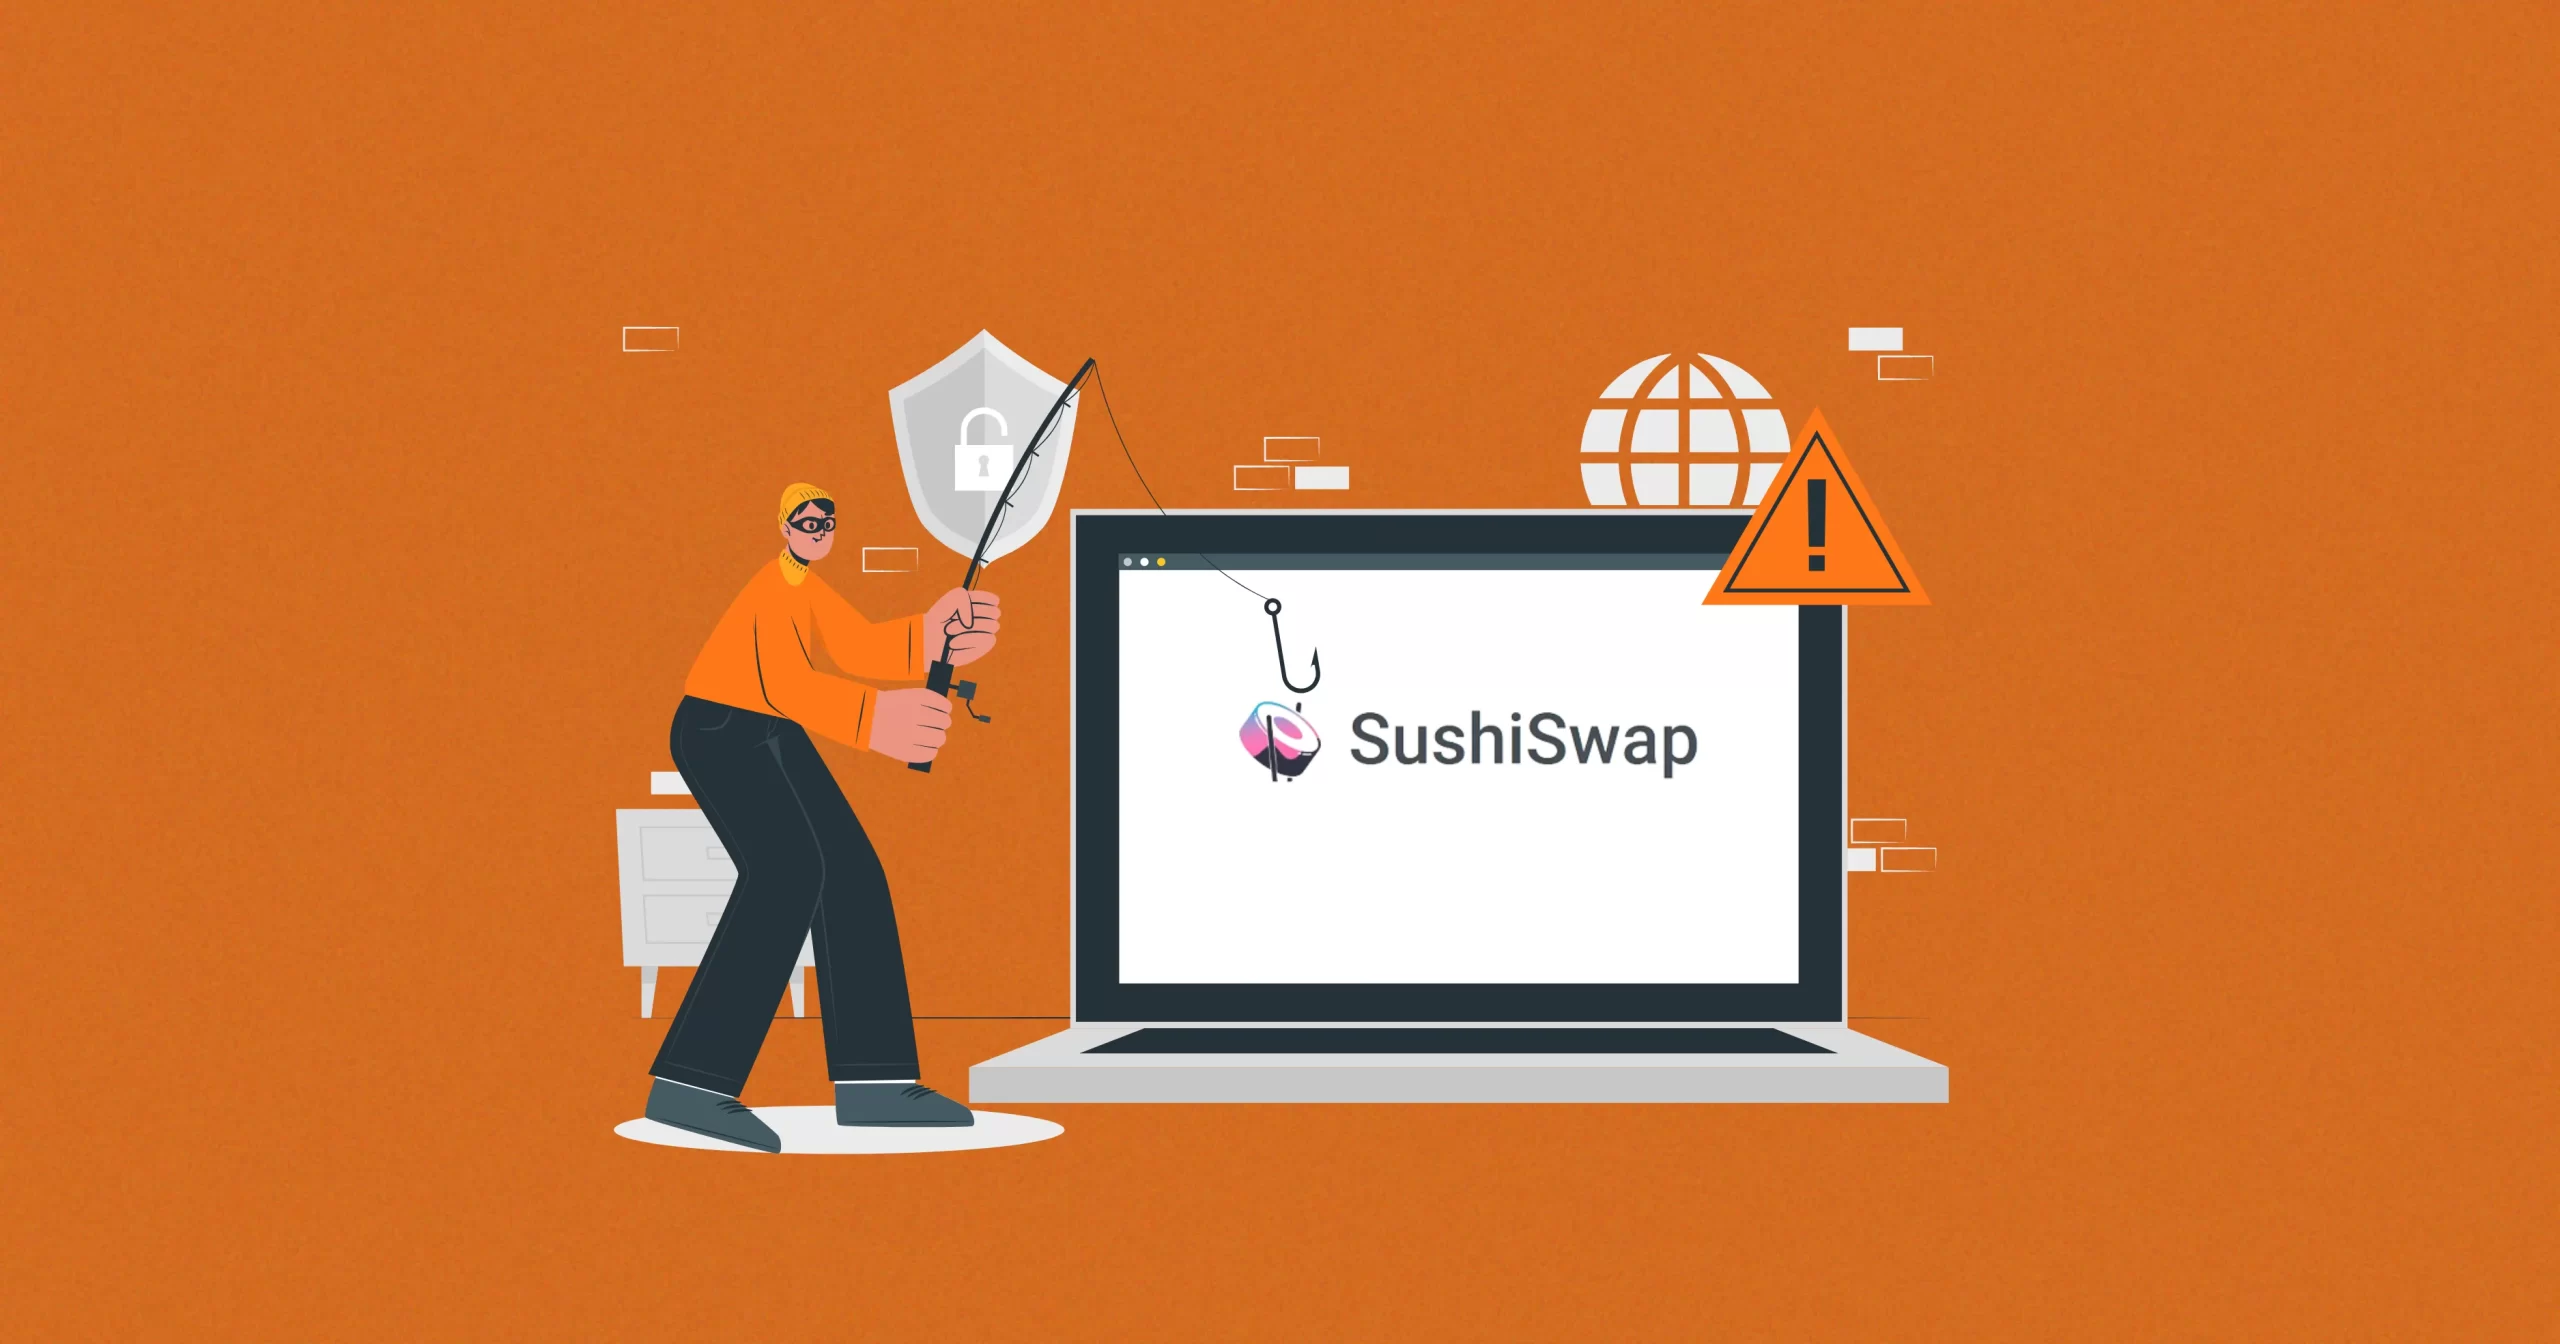 http://image.coinpedia.org/wp-content/uploads/2023/04/10121414/Sushiswap-Hack-scaled.webp